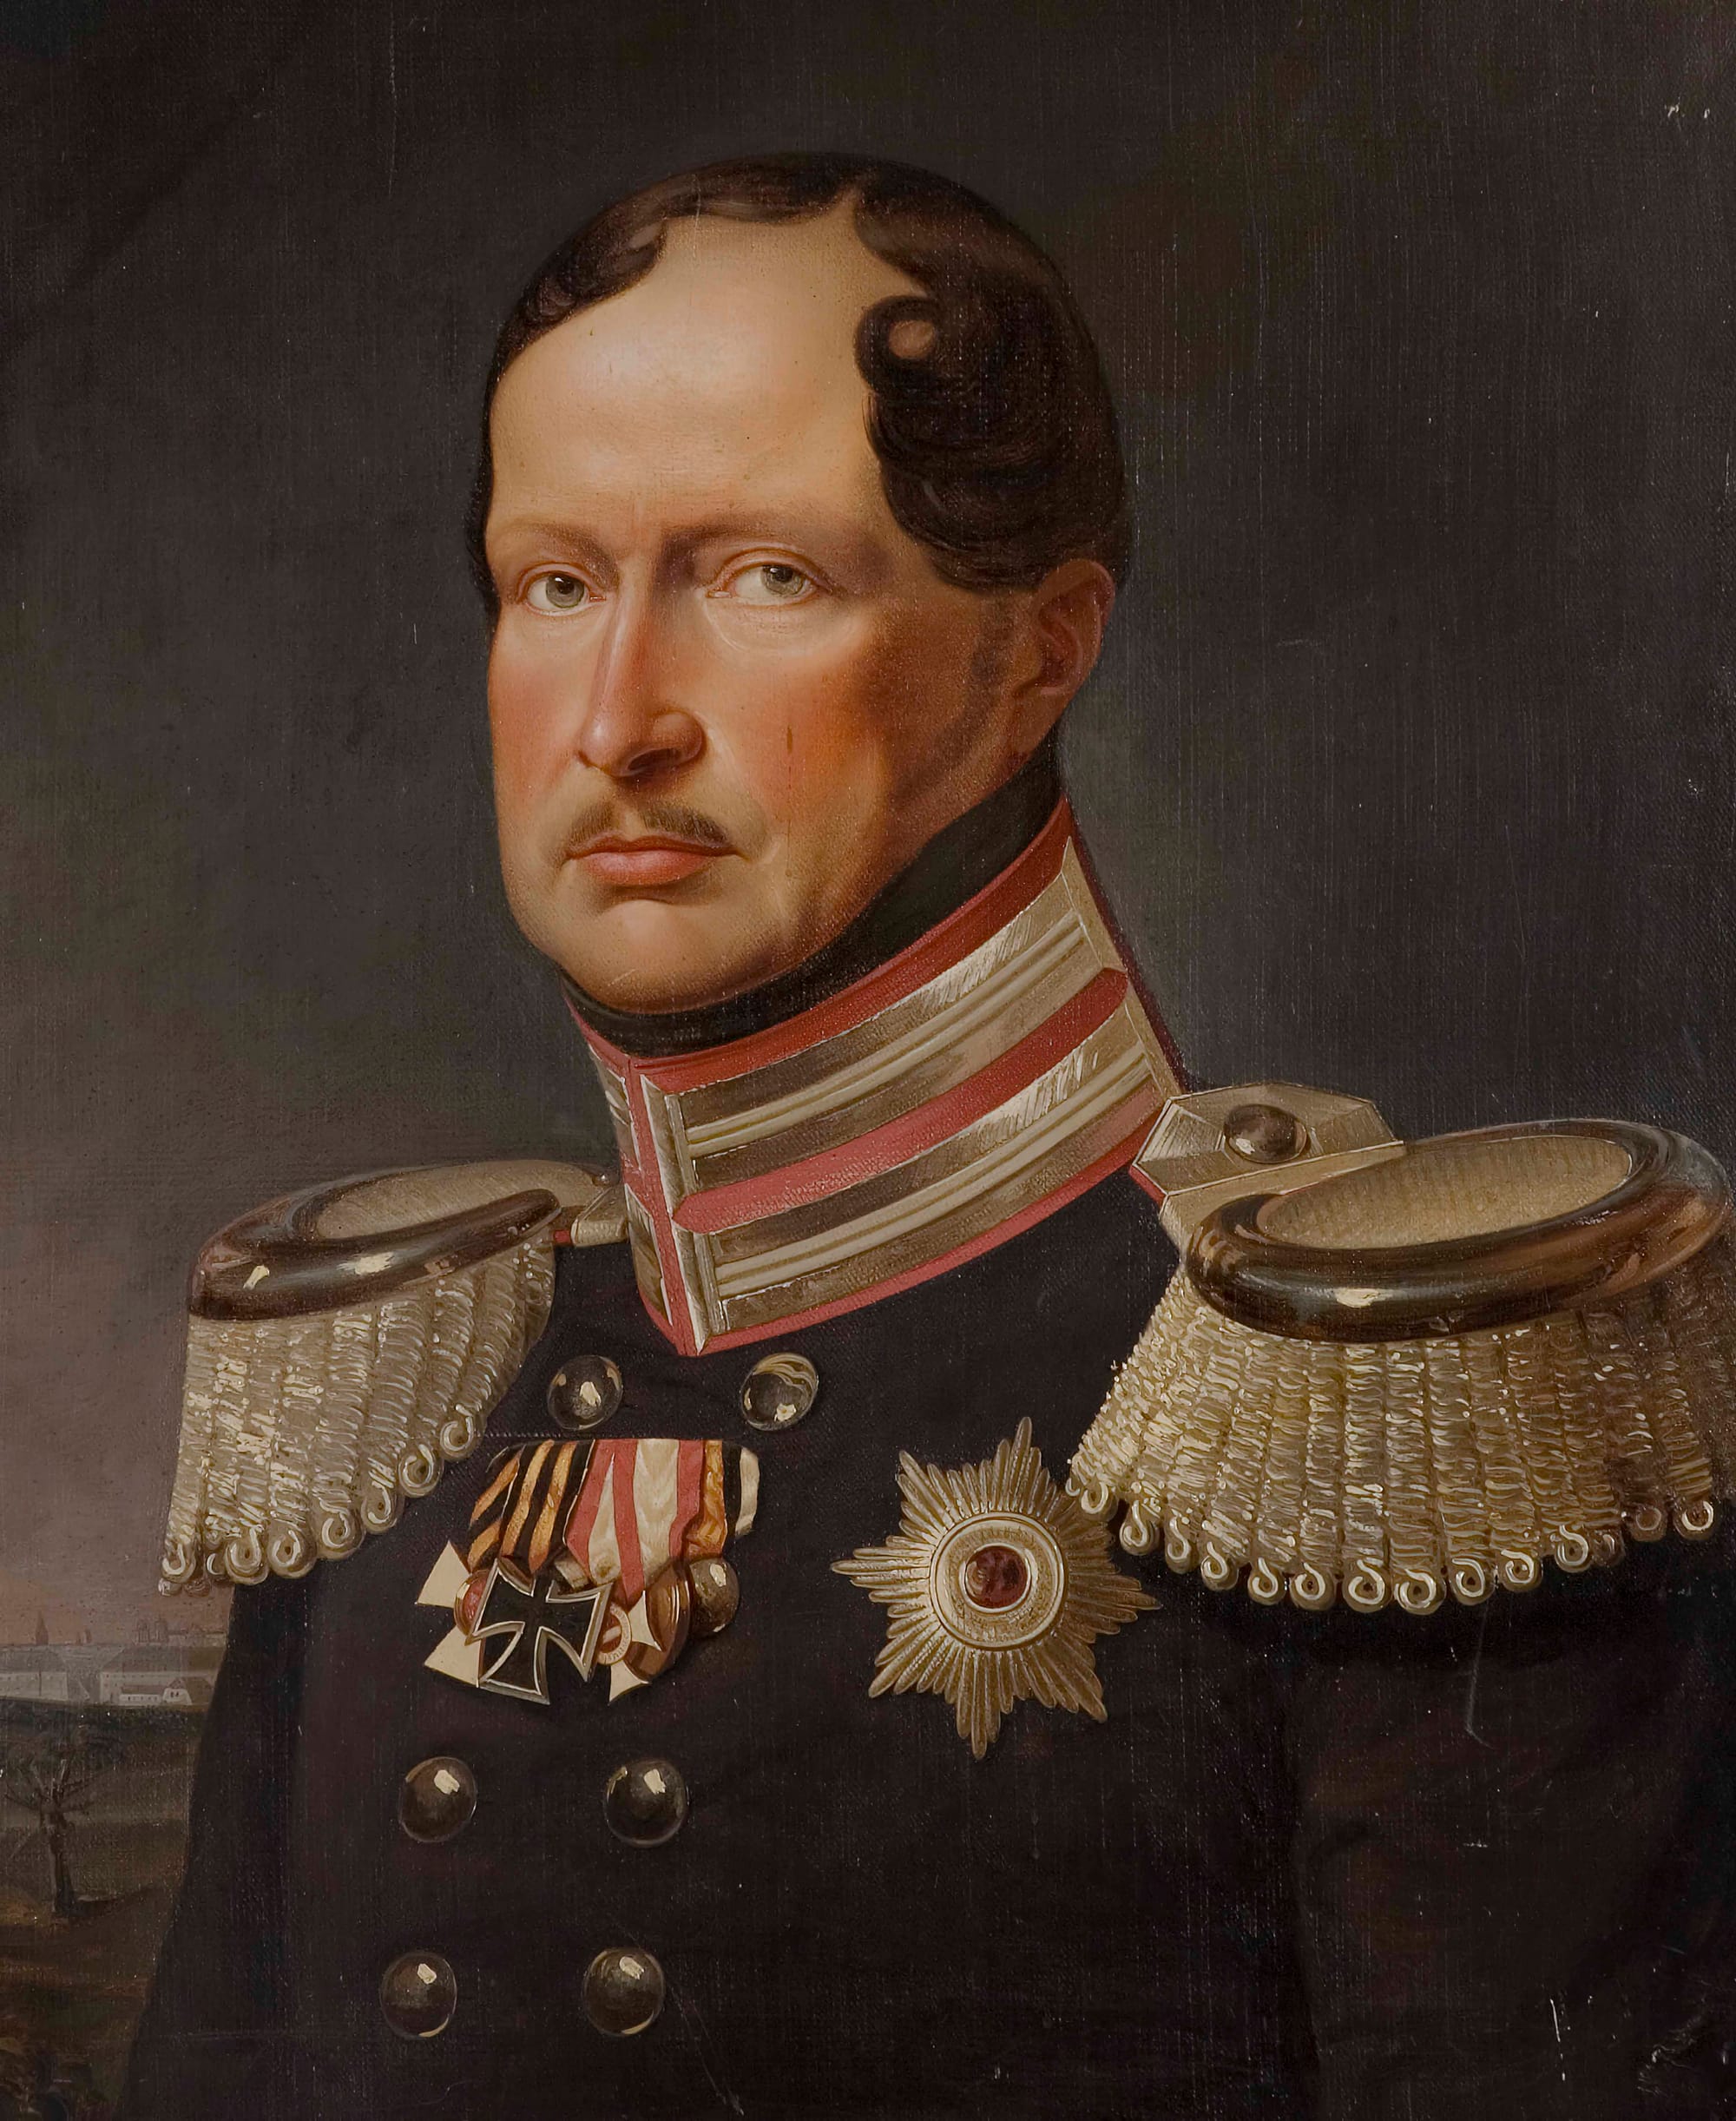 A portrait of Frederick William, capturing a serious countenance, sporting a decorated military-dress jacket with large epaulets.